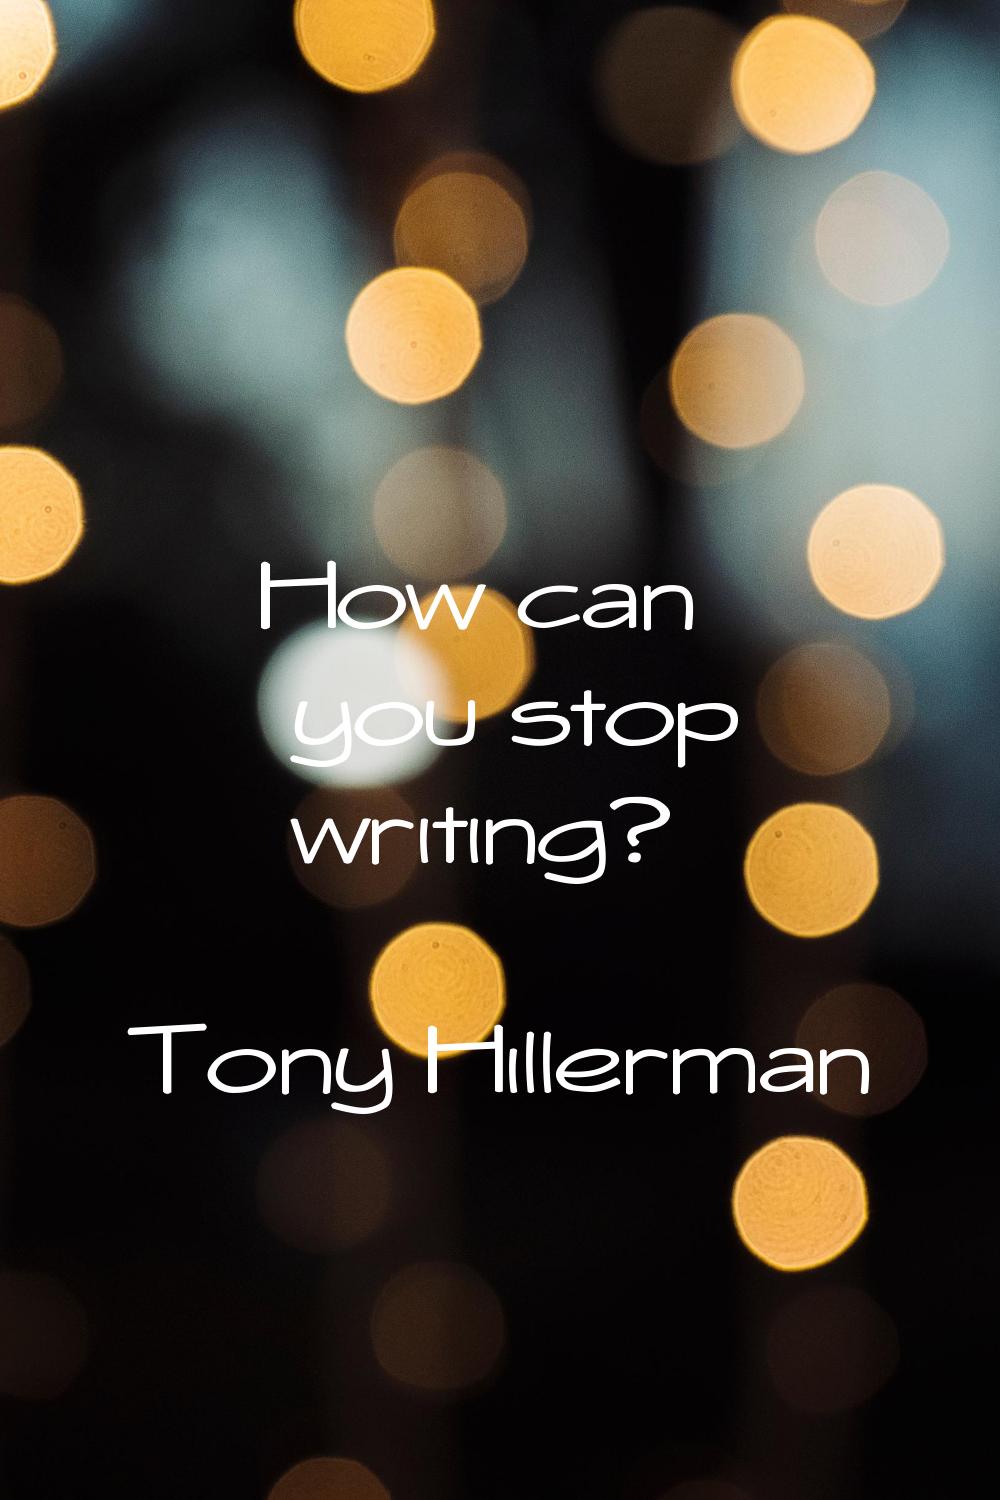 How can you stop writing?